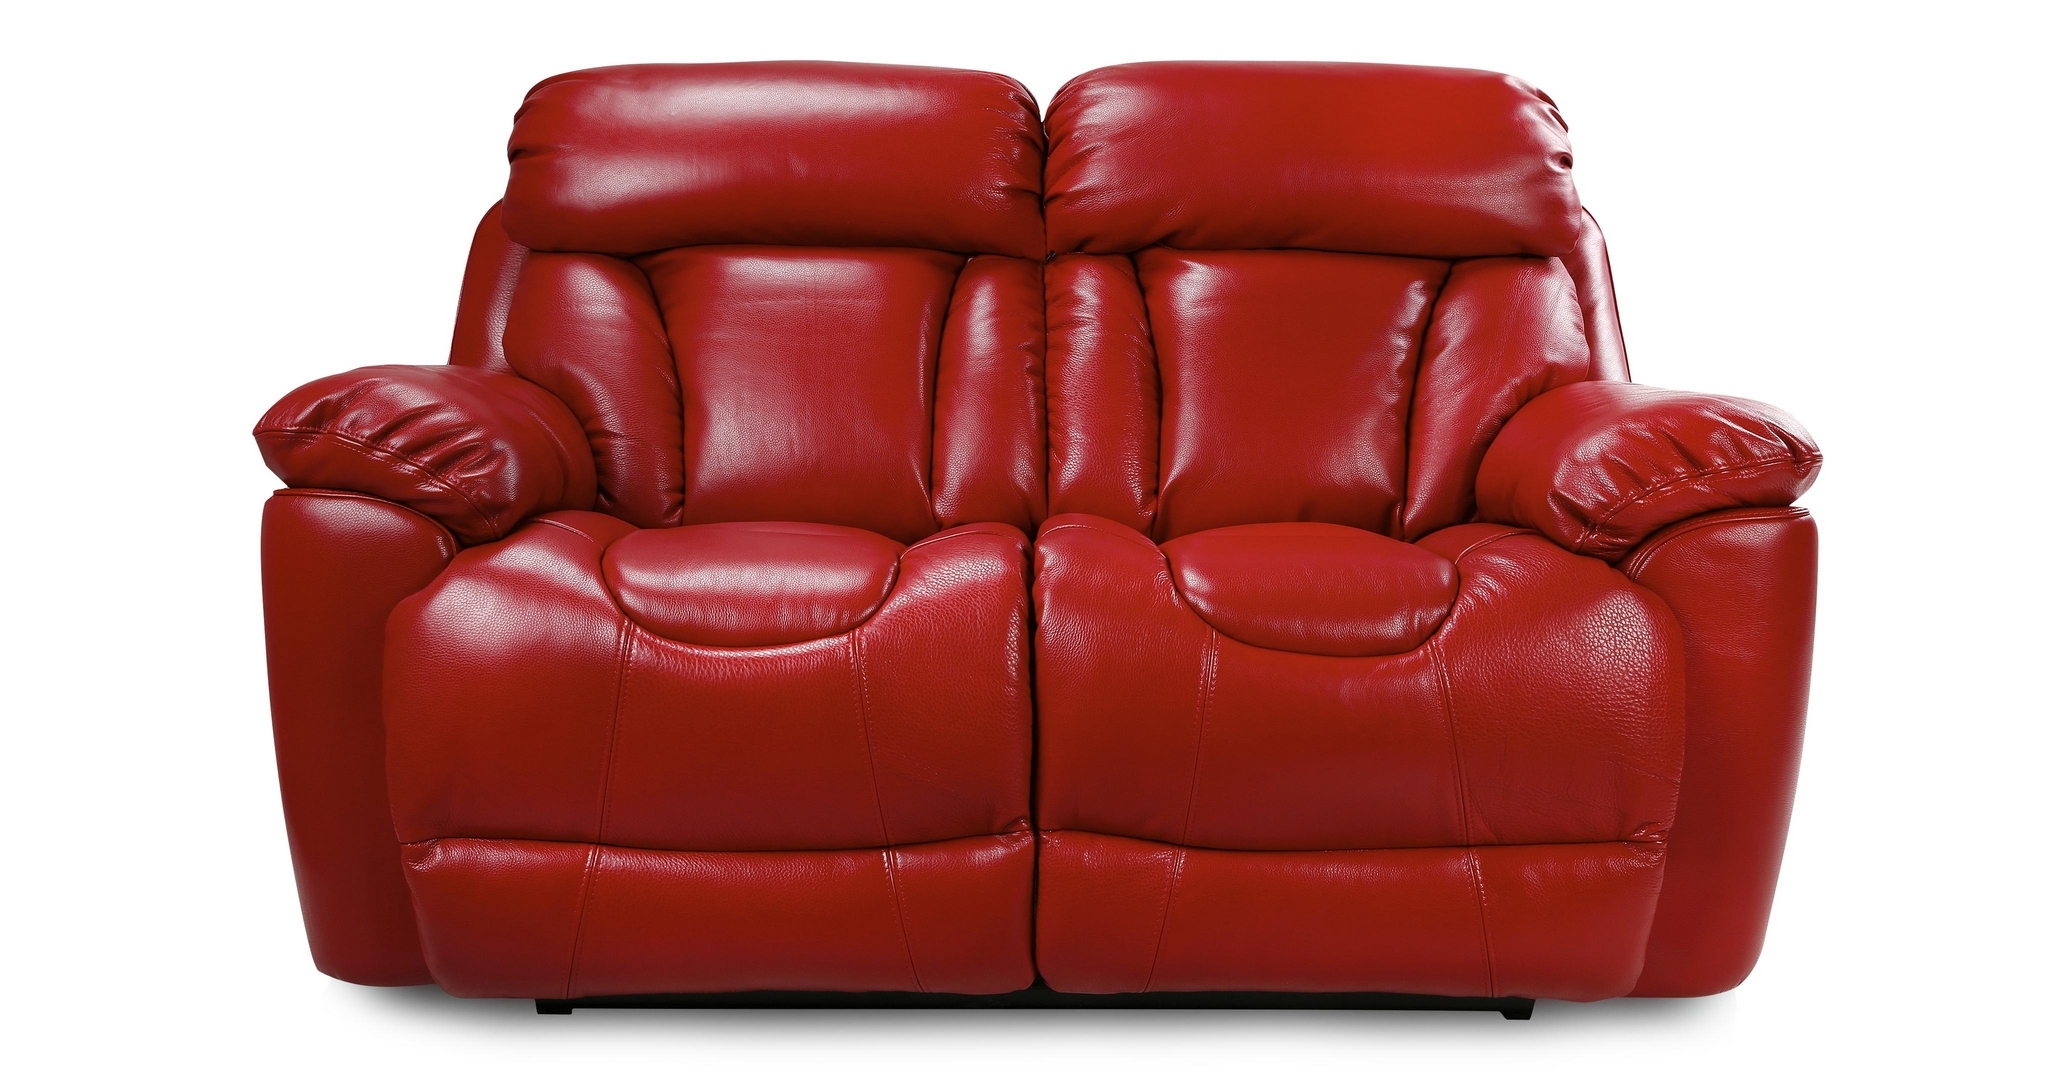 Red recliner chairs